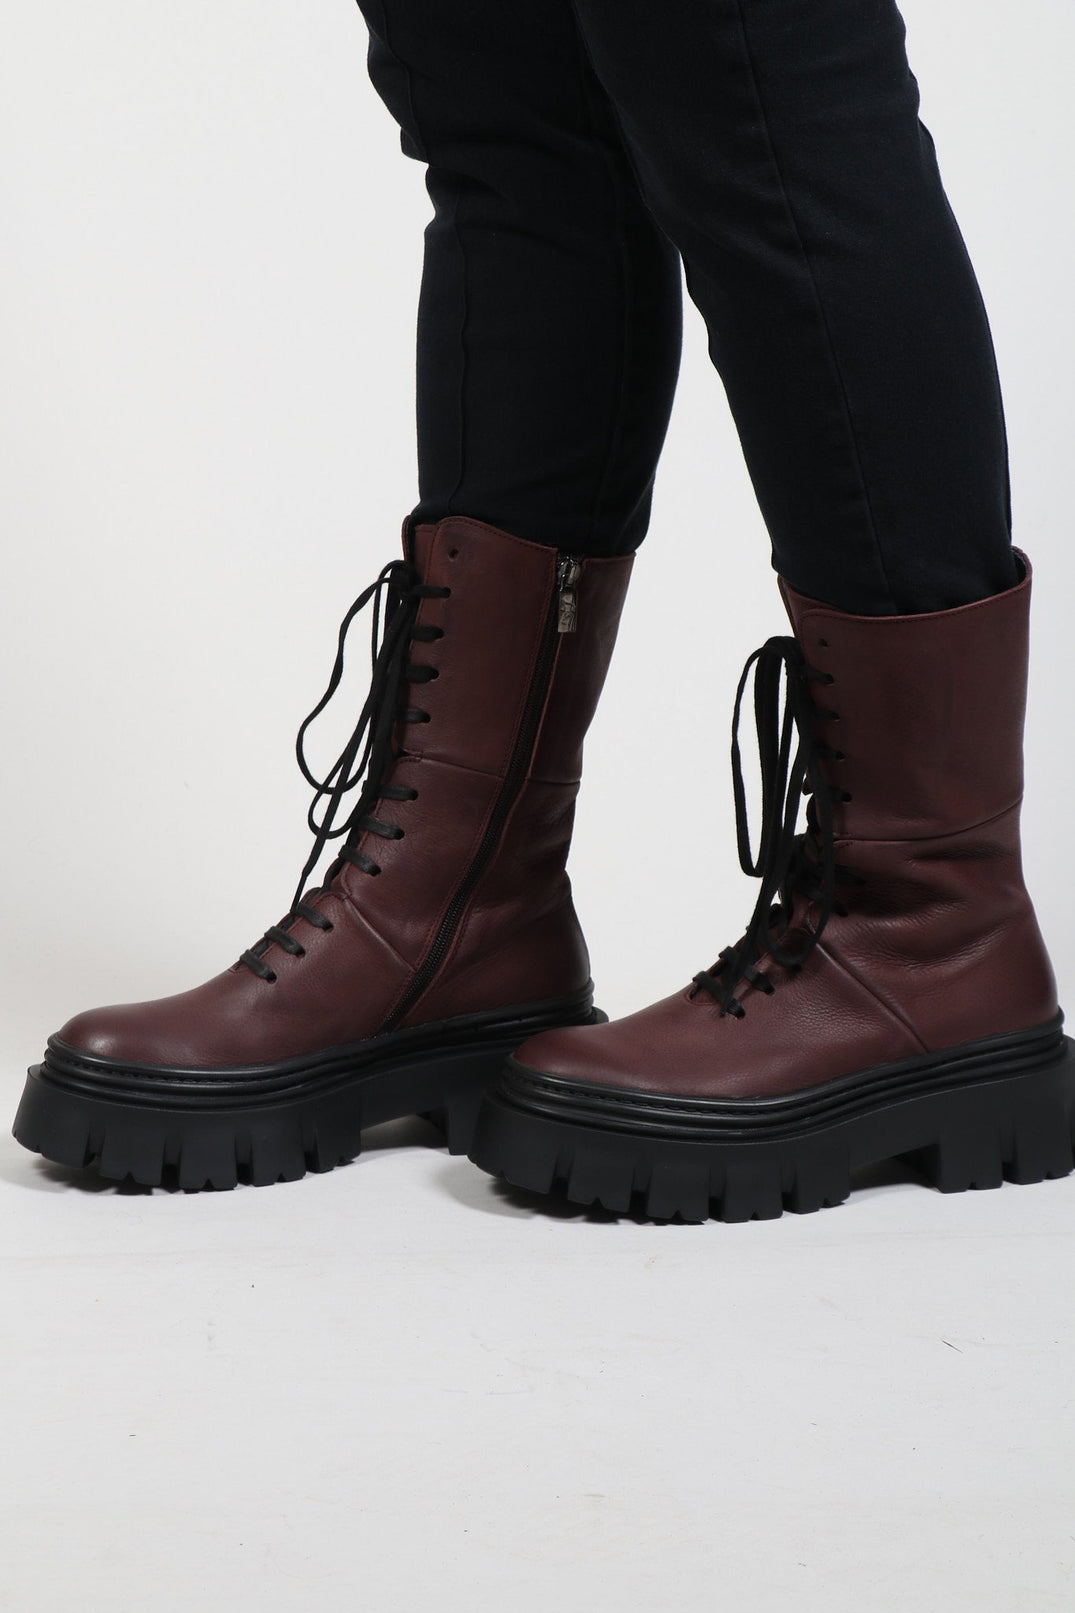 Ankle Lace Up Boots in Gasoline Melanzana